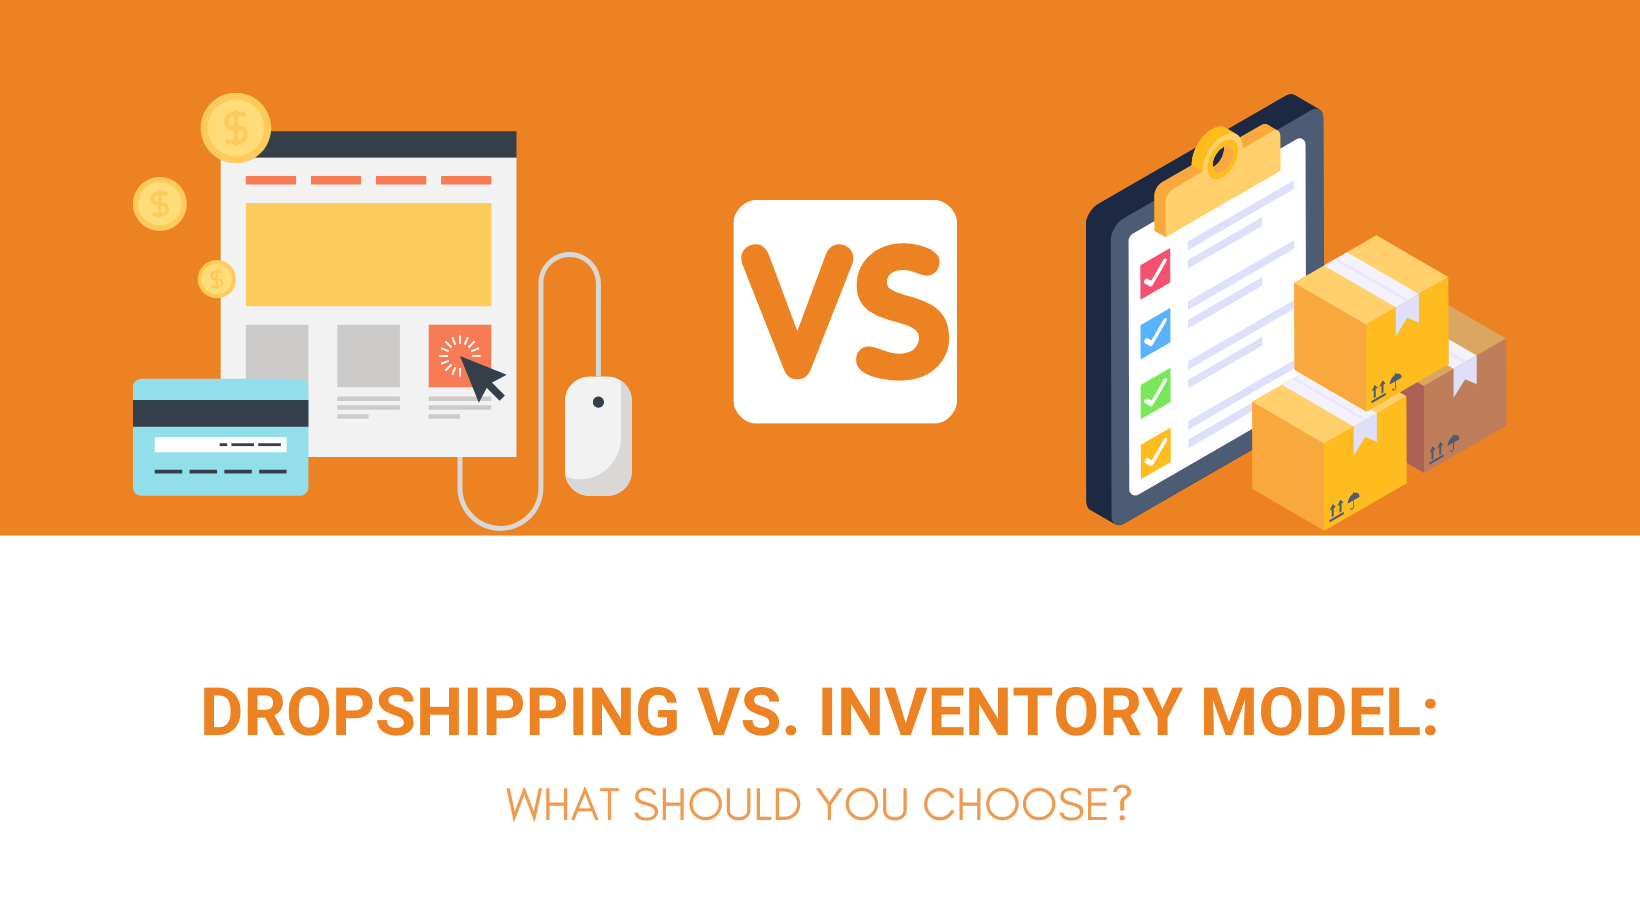 DROPSHIPPING VS. INVENTORY MODEL WHAT SHOULD YOU CHOOSE